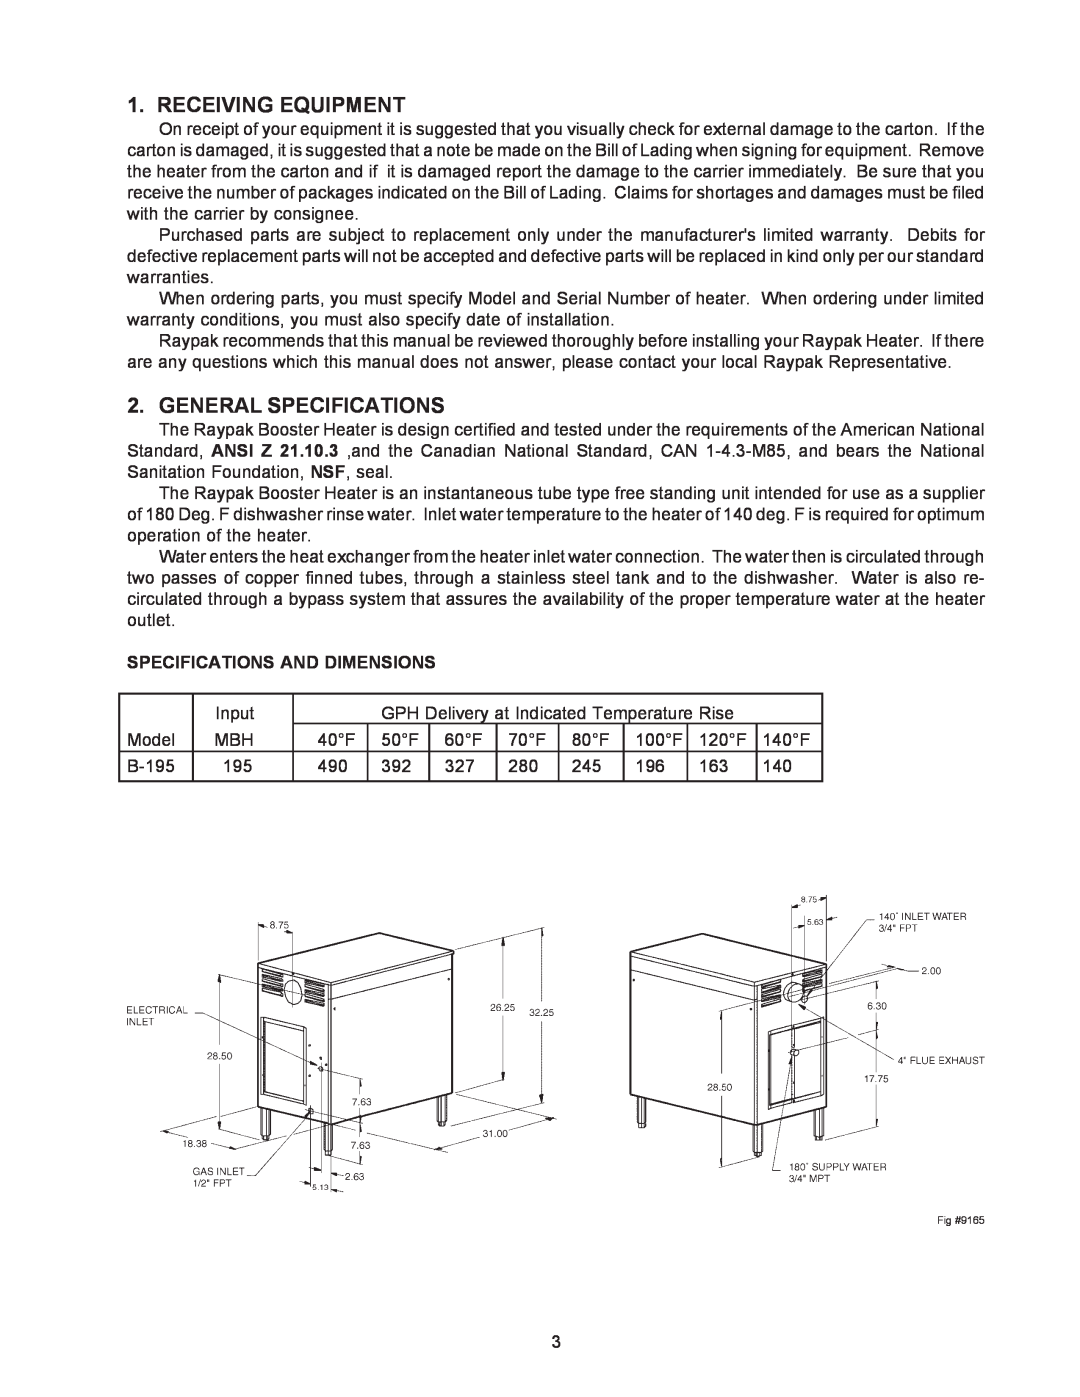 Raypak B-195 installation instructions Receiving Equipment, General Specifications, Specifications And Dimensions 